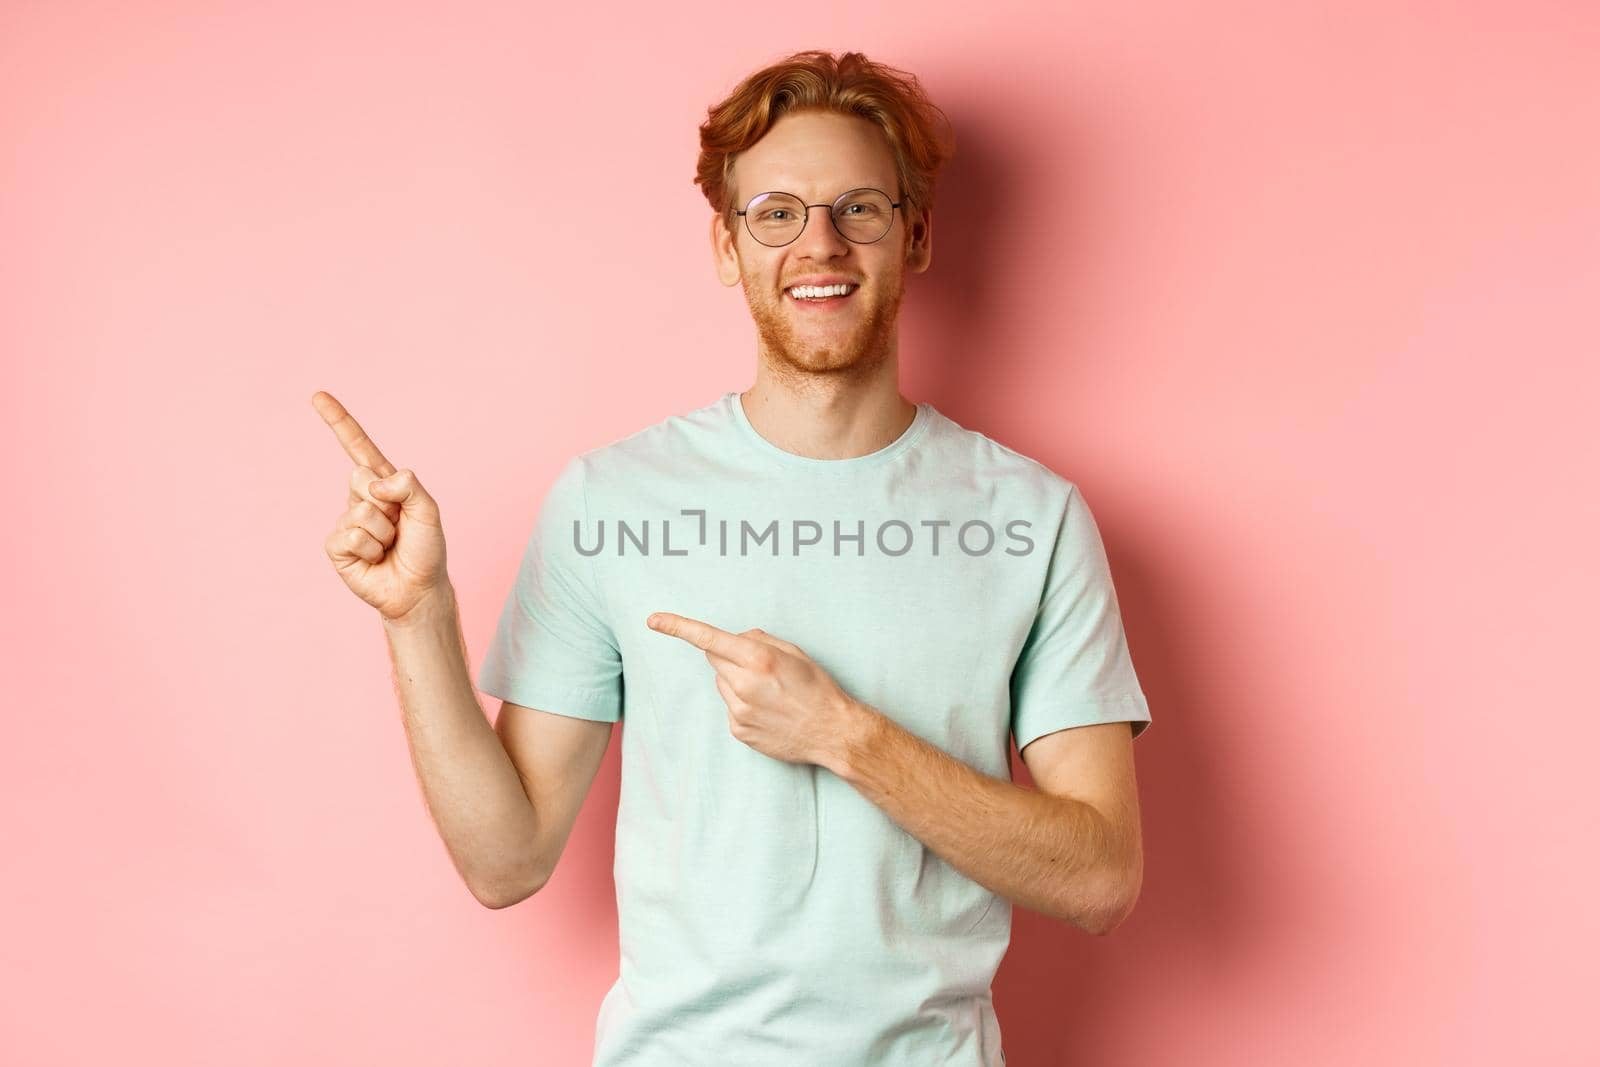 Portrait of cheerful young man with red hair, wearing glasses, pointing fingers at upper left corner and smiling, standing over pink background.